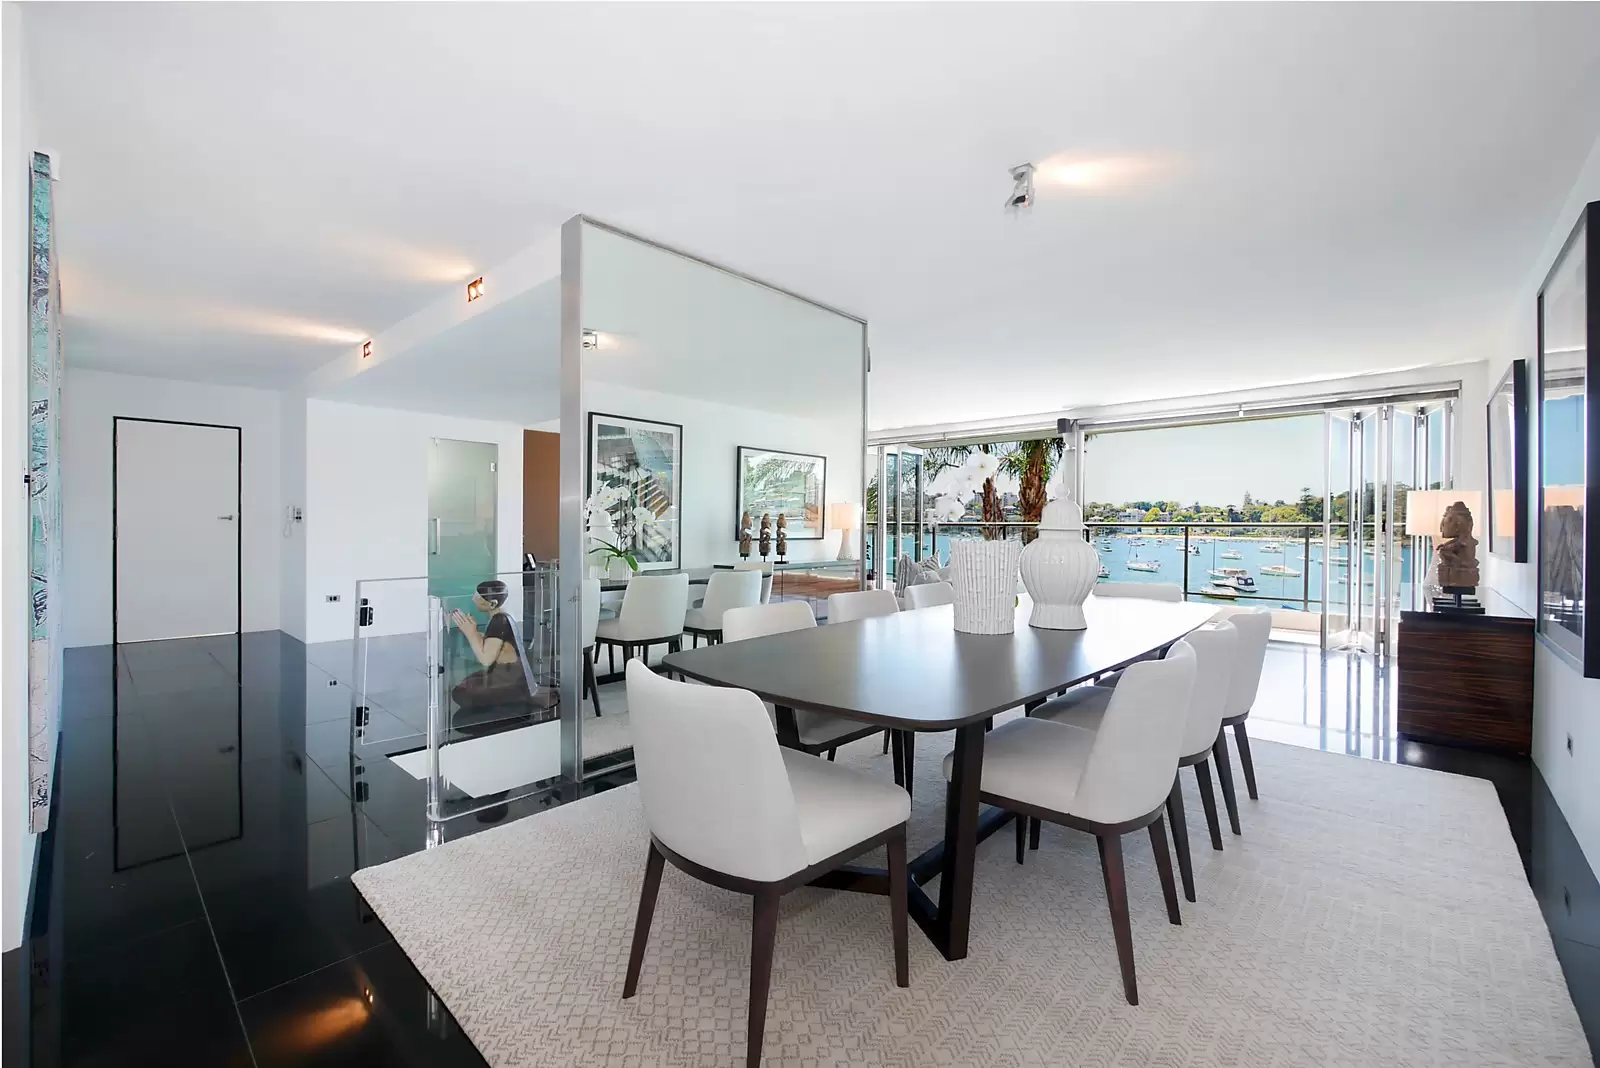 Photo #4: 13/33 Sutherland Crescent, Darling Point - Sold by Sydney Sotheby's International Realty